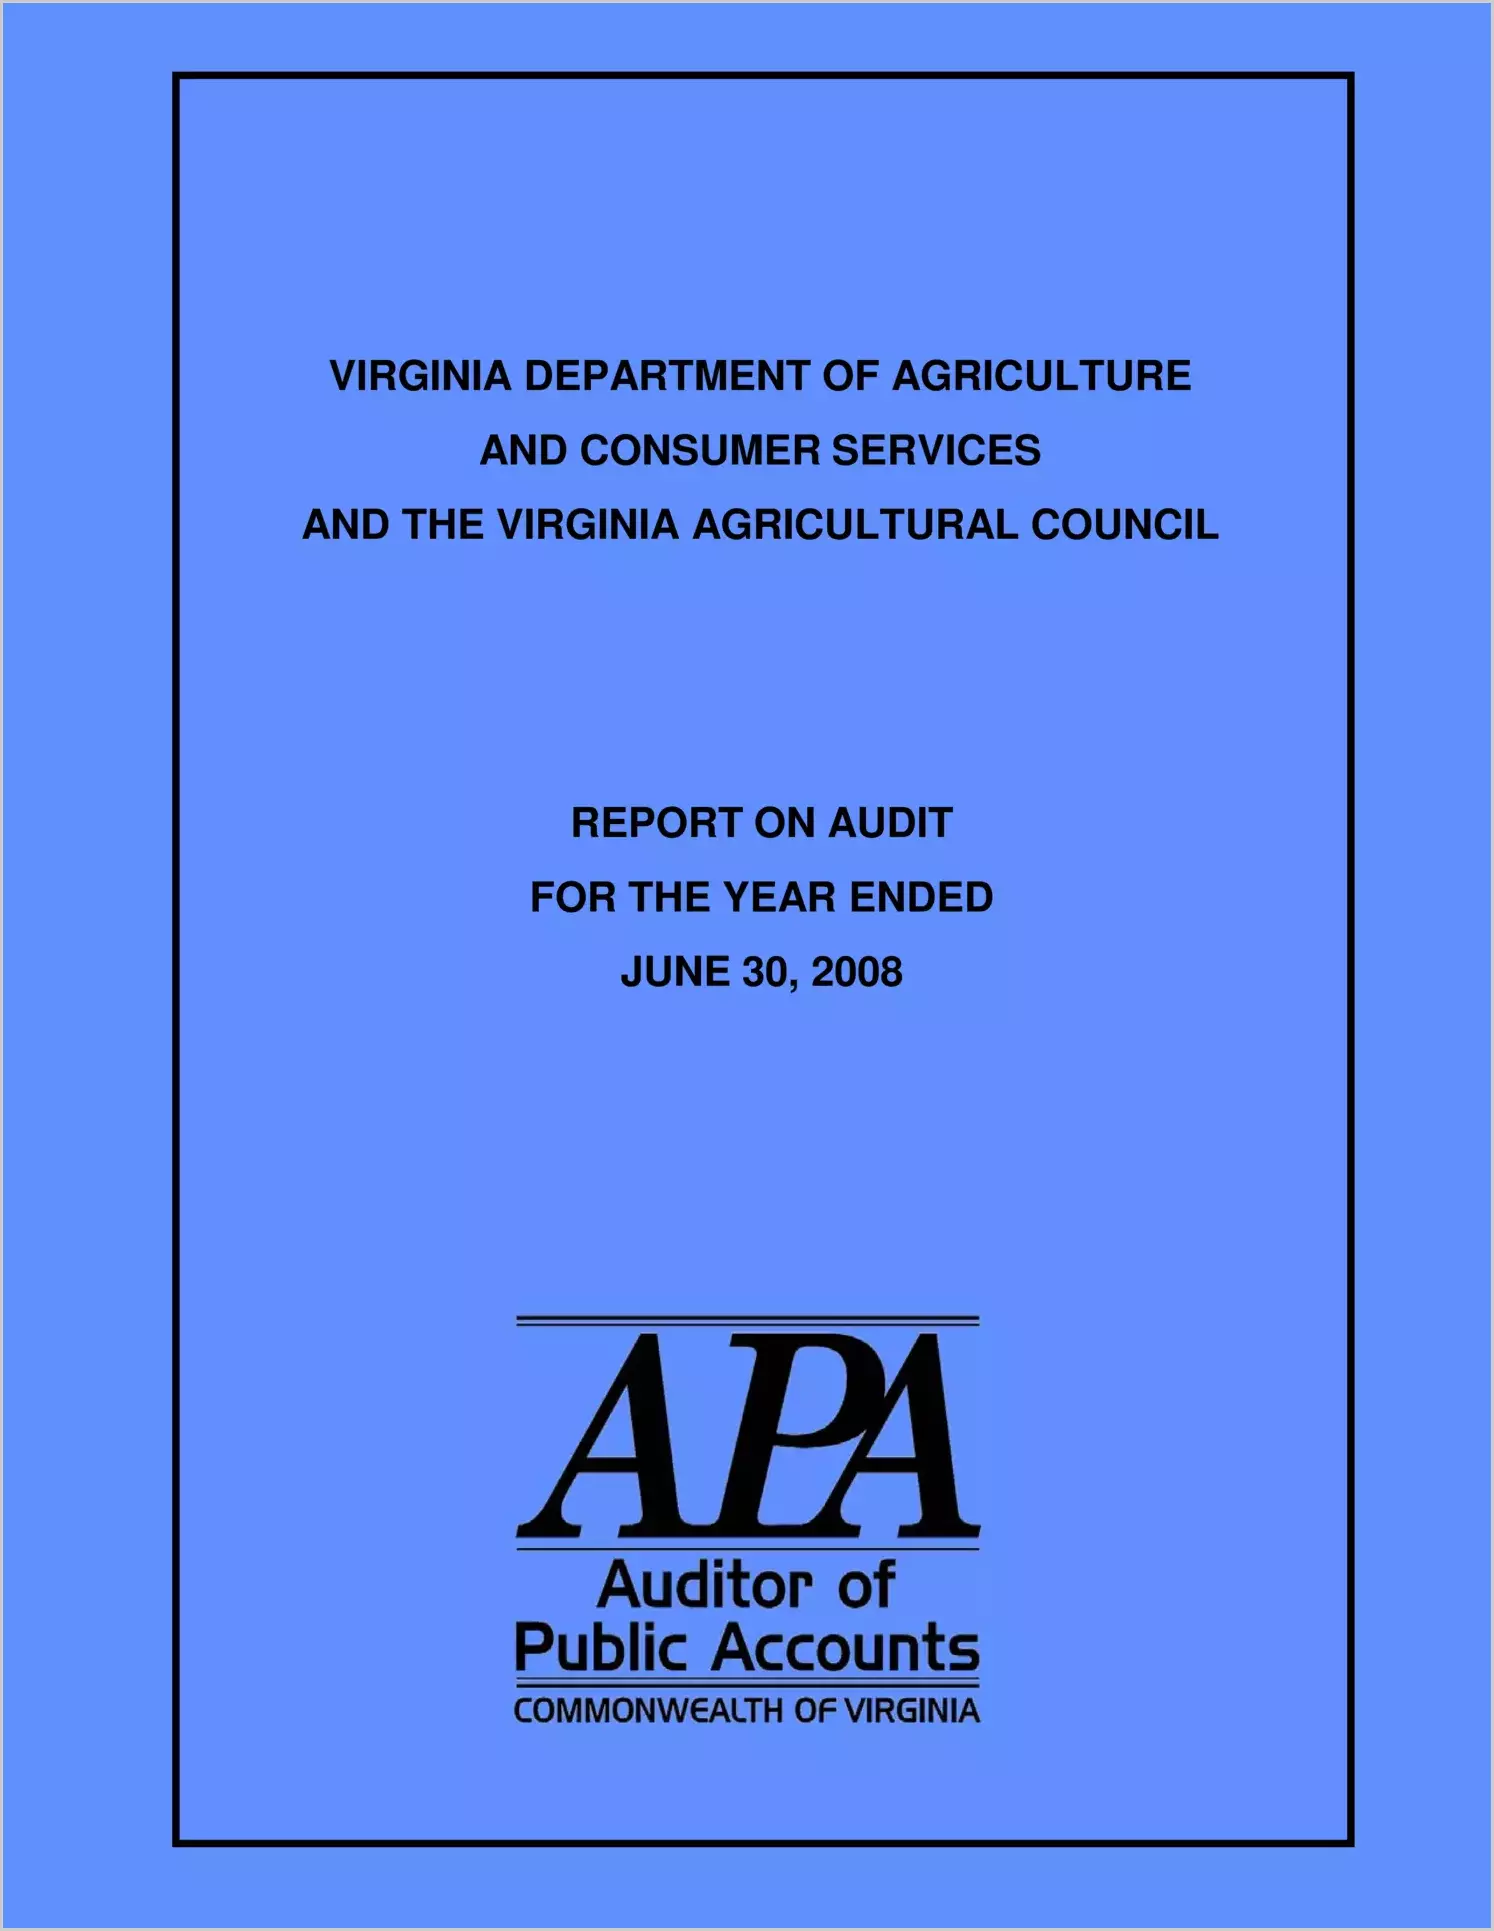 Virginia Department of Agriculture and Consumer Services and the Virginia Agricultural Council for the year ended June 30, 2008